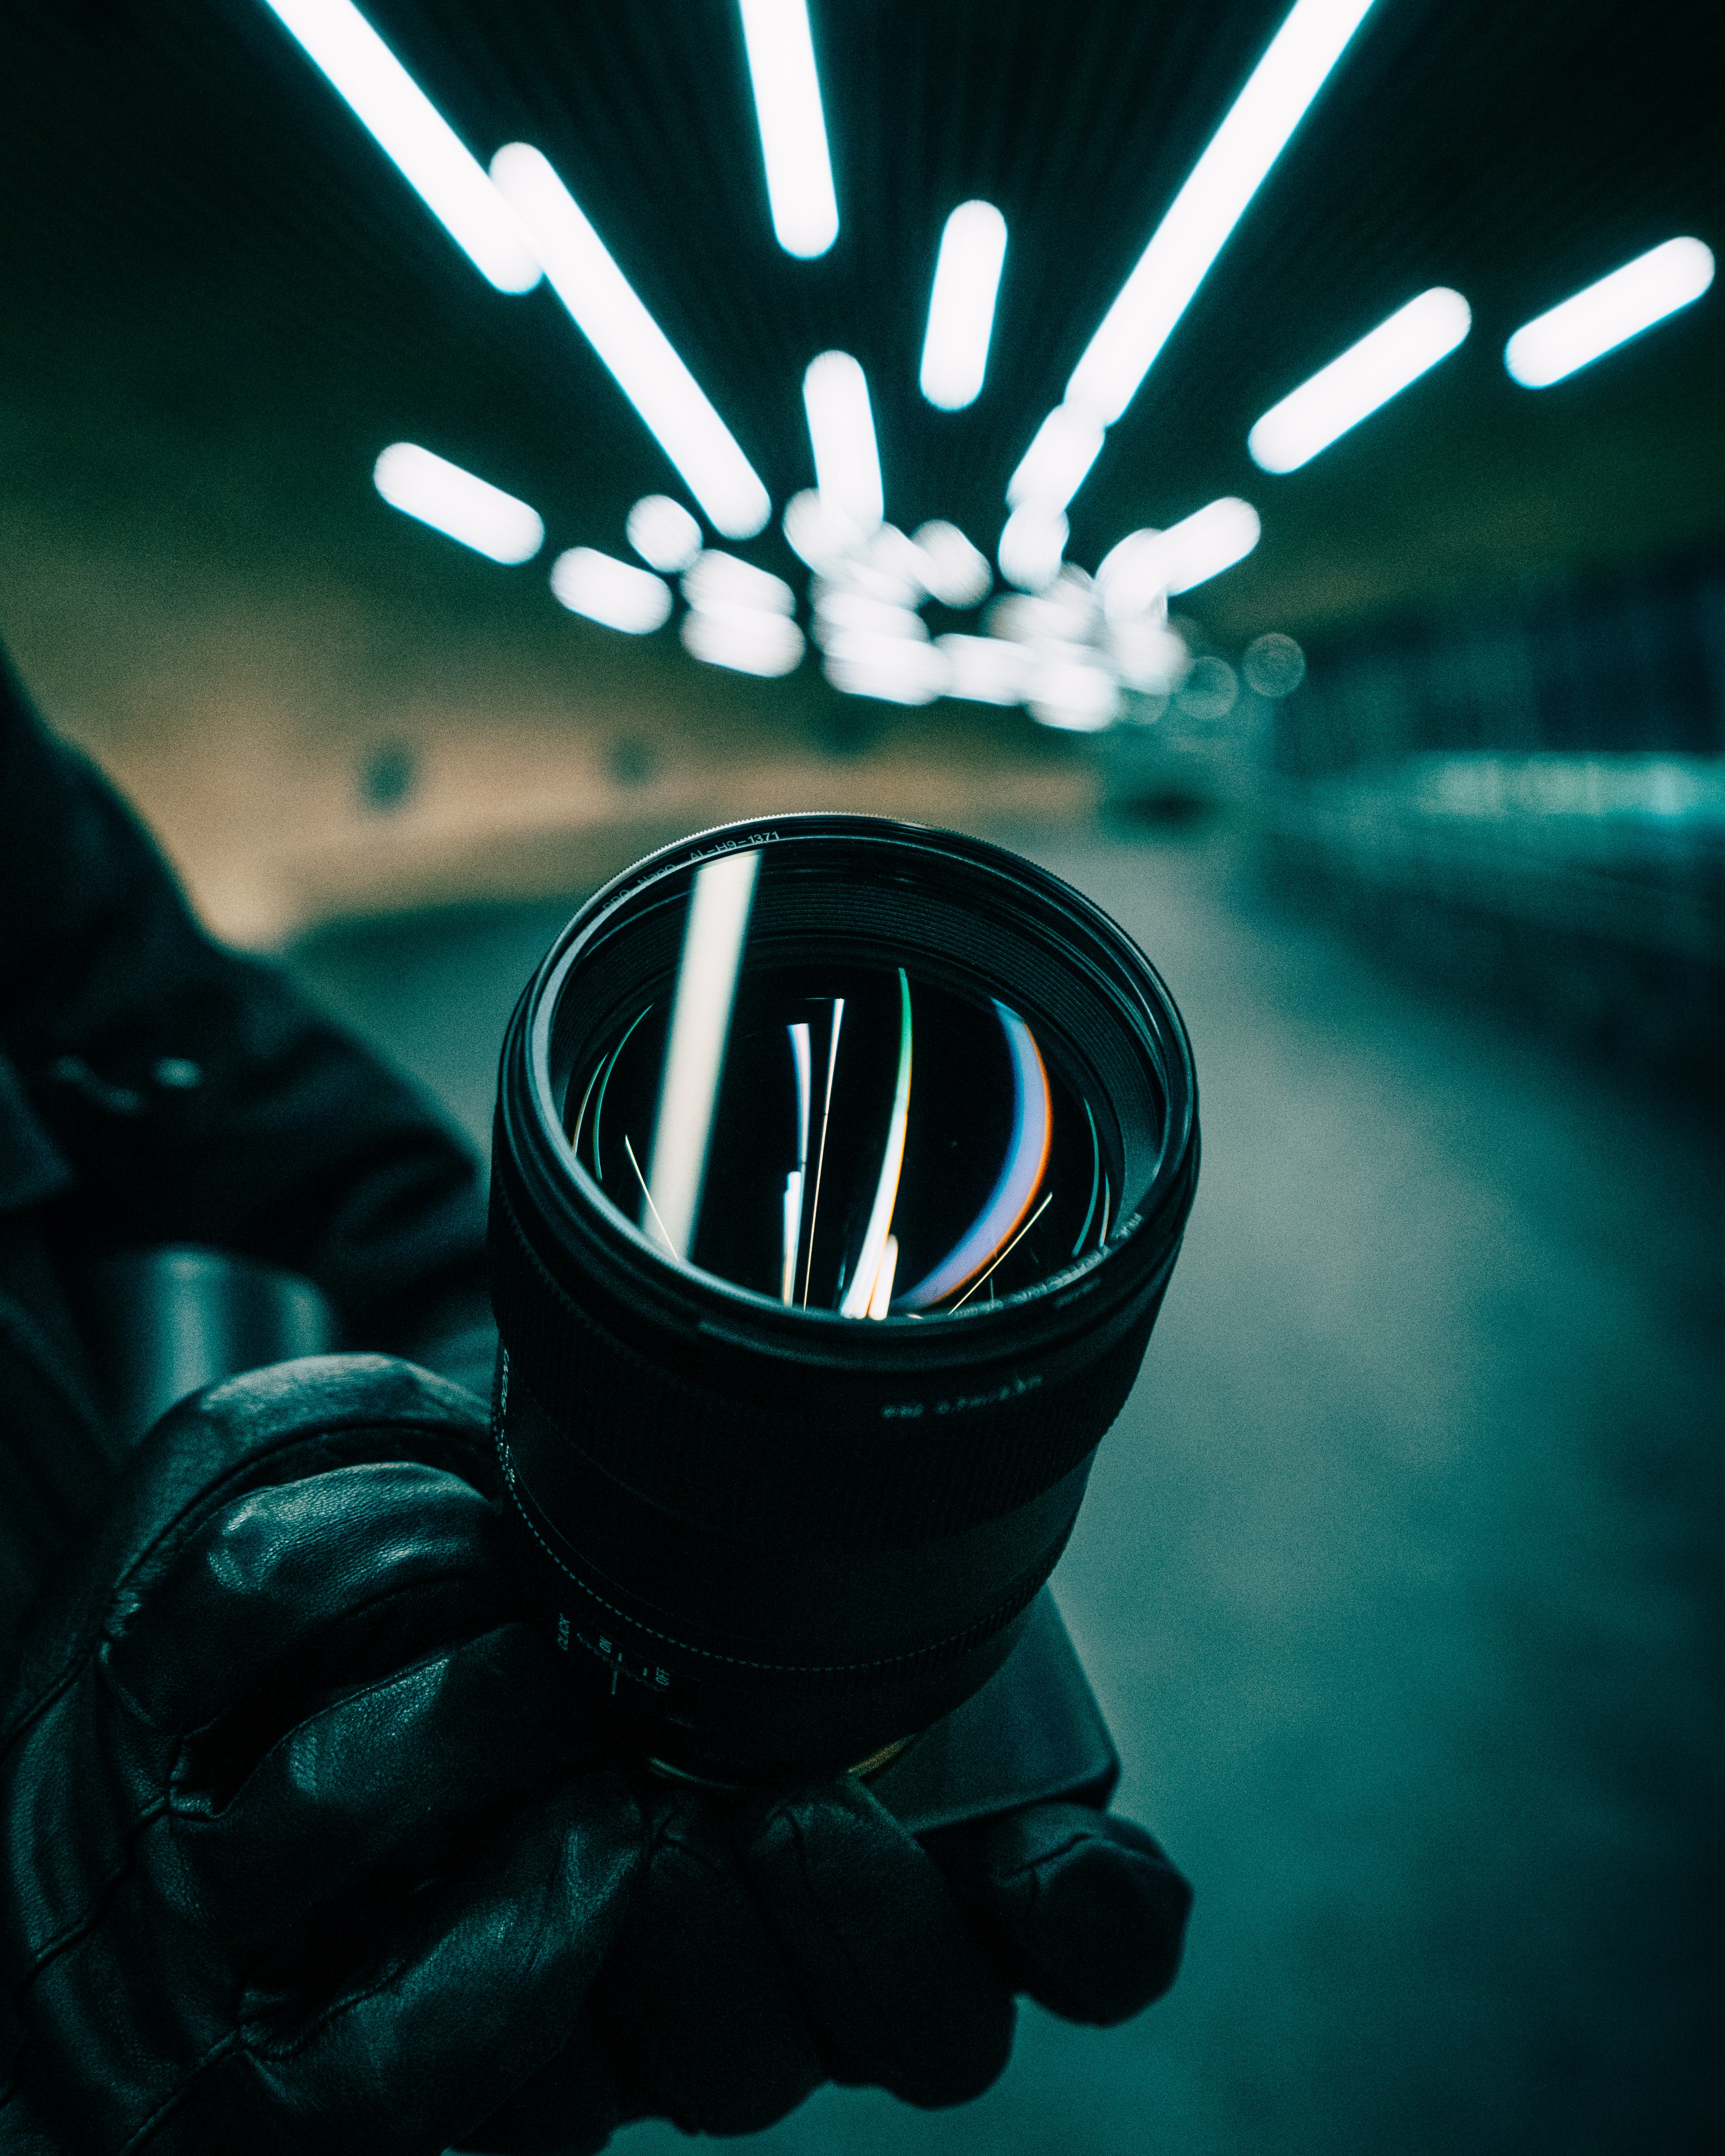 black, hands, lens, reflection, miscellanea, miscellaneous, lamp, camera, lamps for android